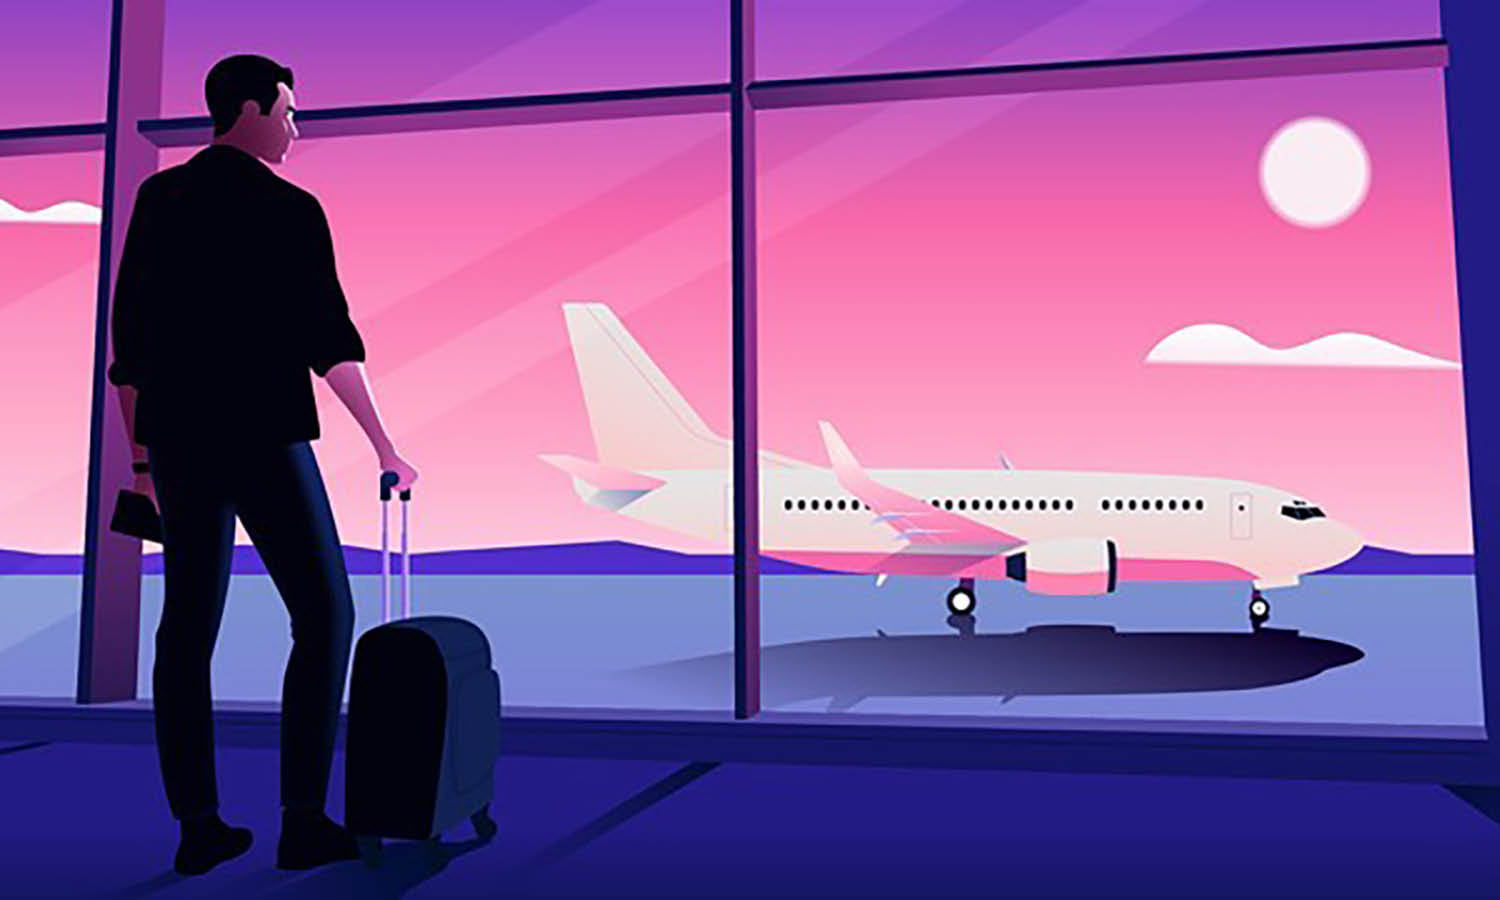 10 Tips on How to Illustrate an Airplane with Adobe Illustrator